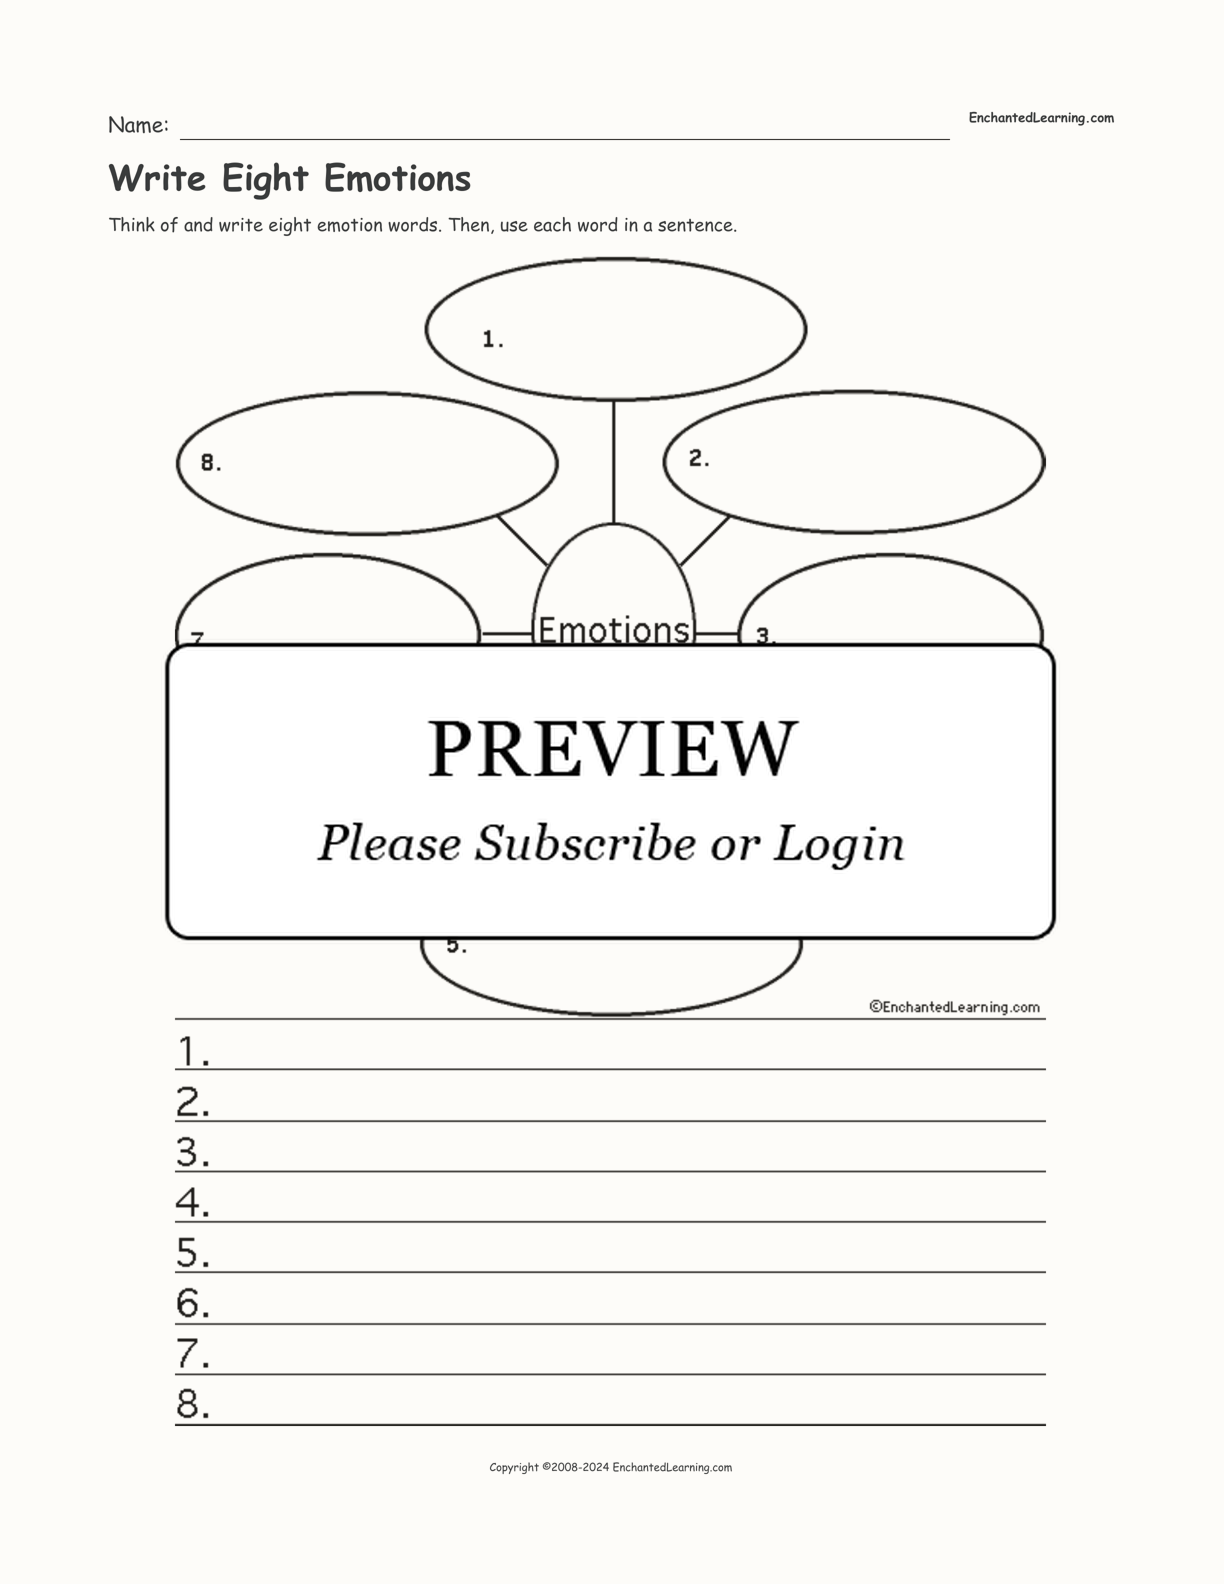 Write Eight Emotions interactive worksheet page 1